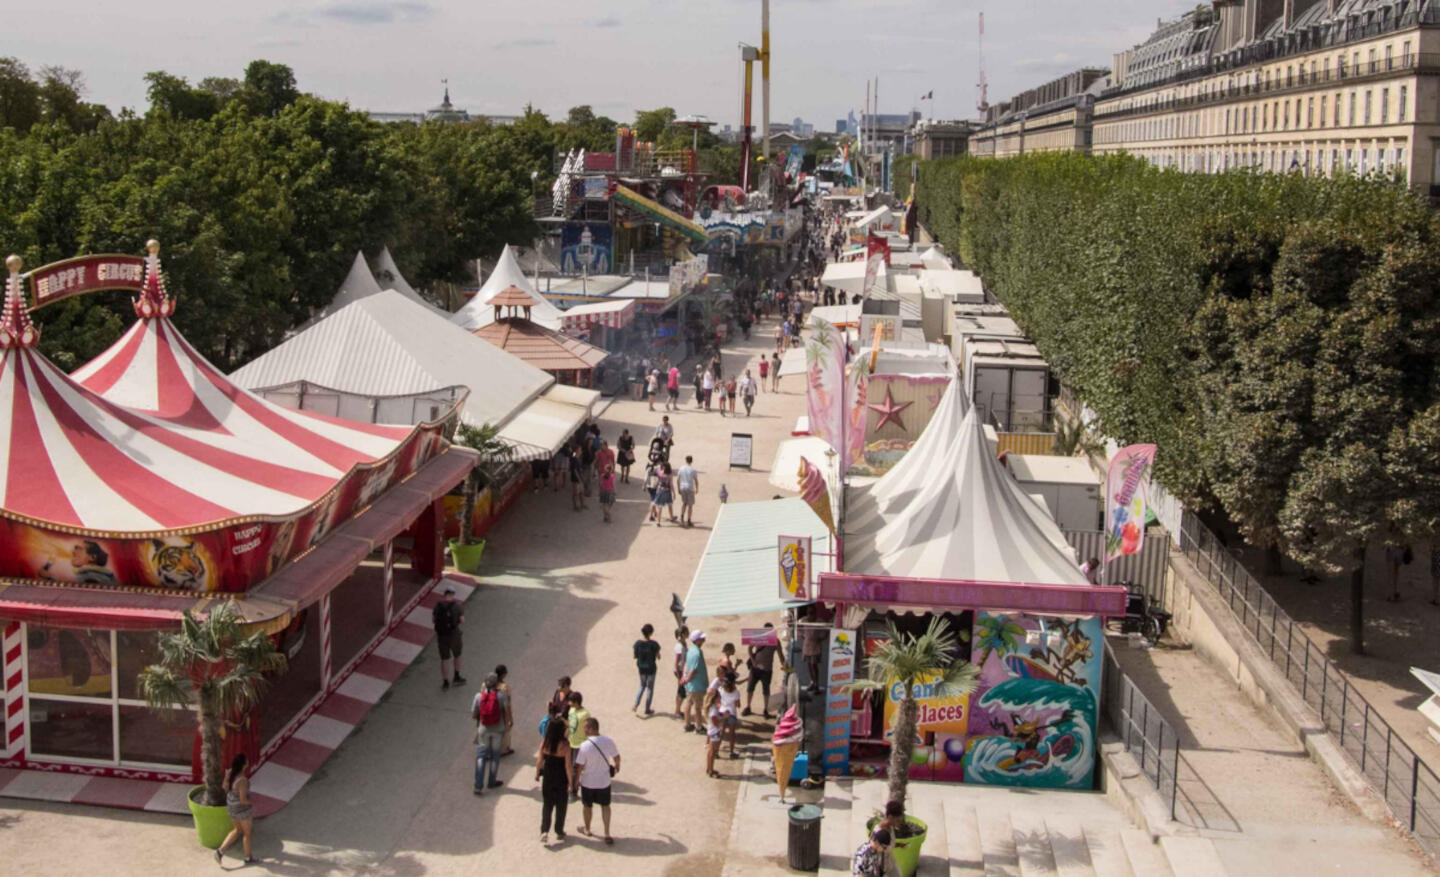 The central avenue of the Tuileries Festival, with its colourful stalls and visitors enjoying the attractions under a clear blue sky.